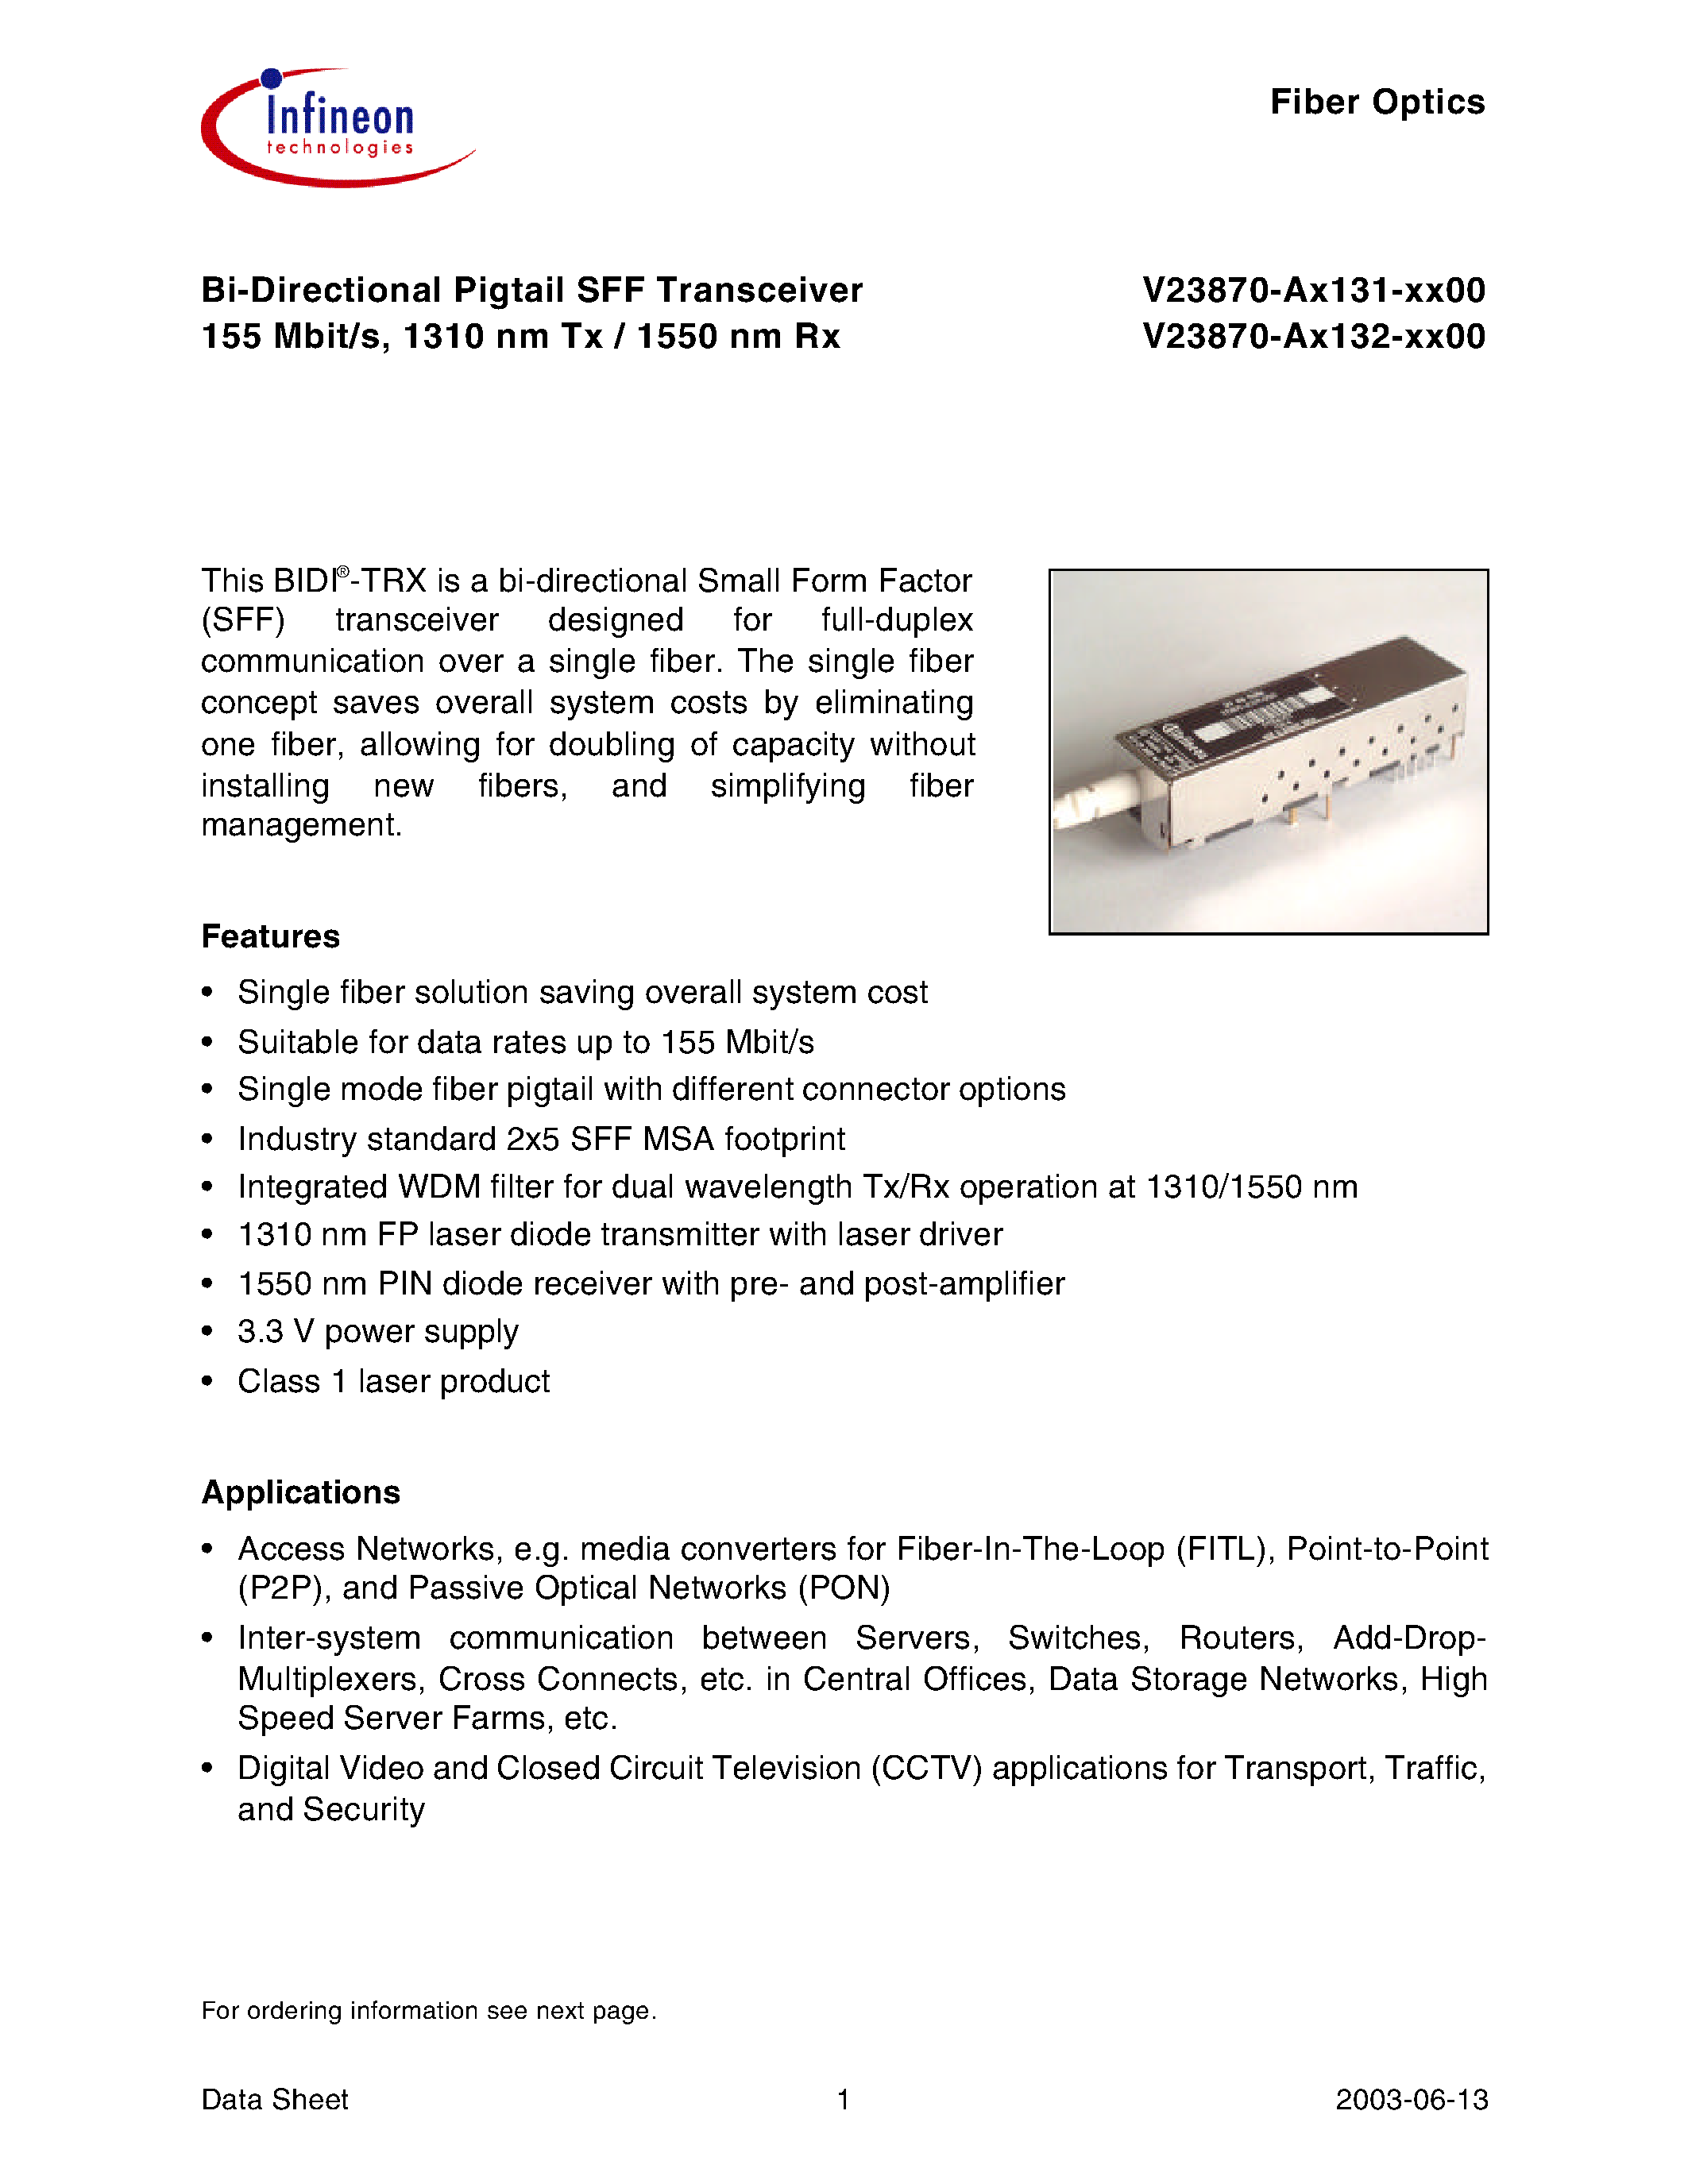 Datasheet V23870-A1132-C200 - Bi-Directional Pigtail SFF Transceiver 155 Mbit/s/ 1310 nm Tx / 1550 nm Rx page 1